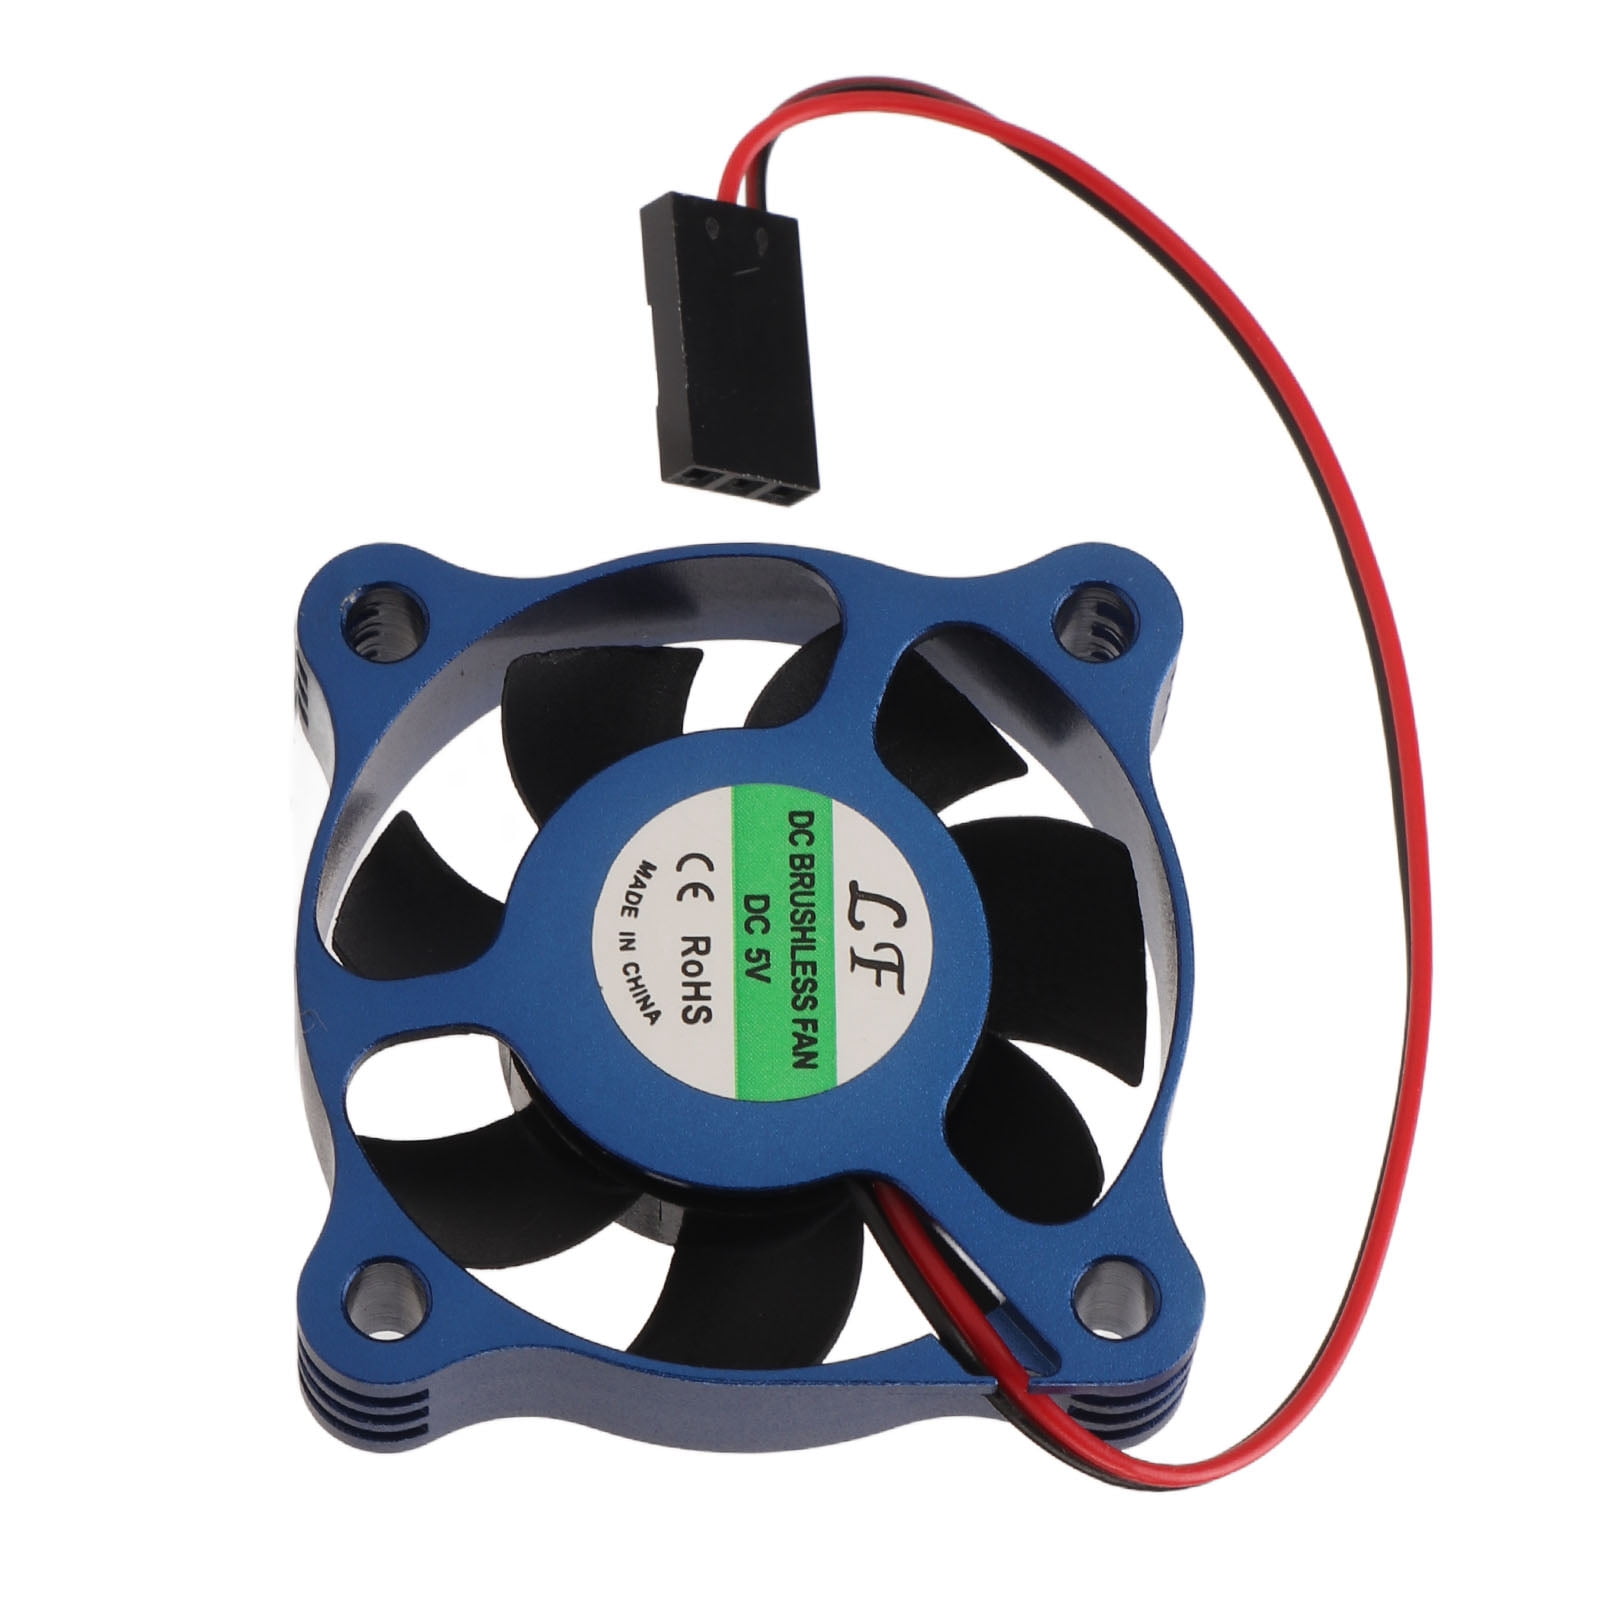 RC ESC Cooling Fan, Replacement Powerful Compact Cooling Fan Heat Dissipation For 1/10 1/12 1/8 RC Car Black Walmart.com